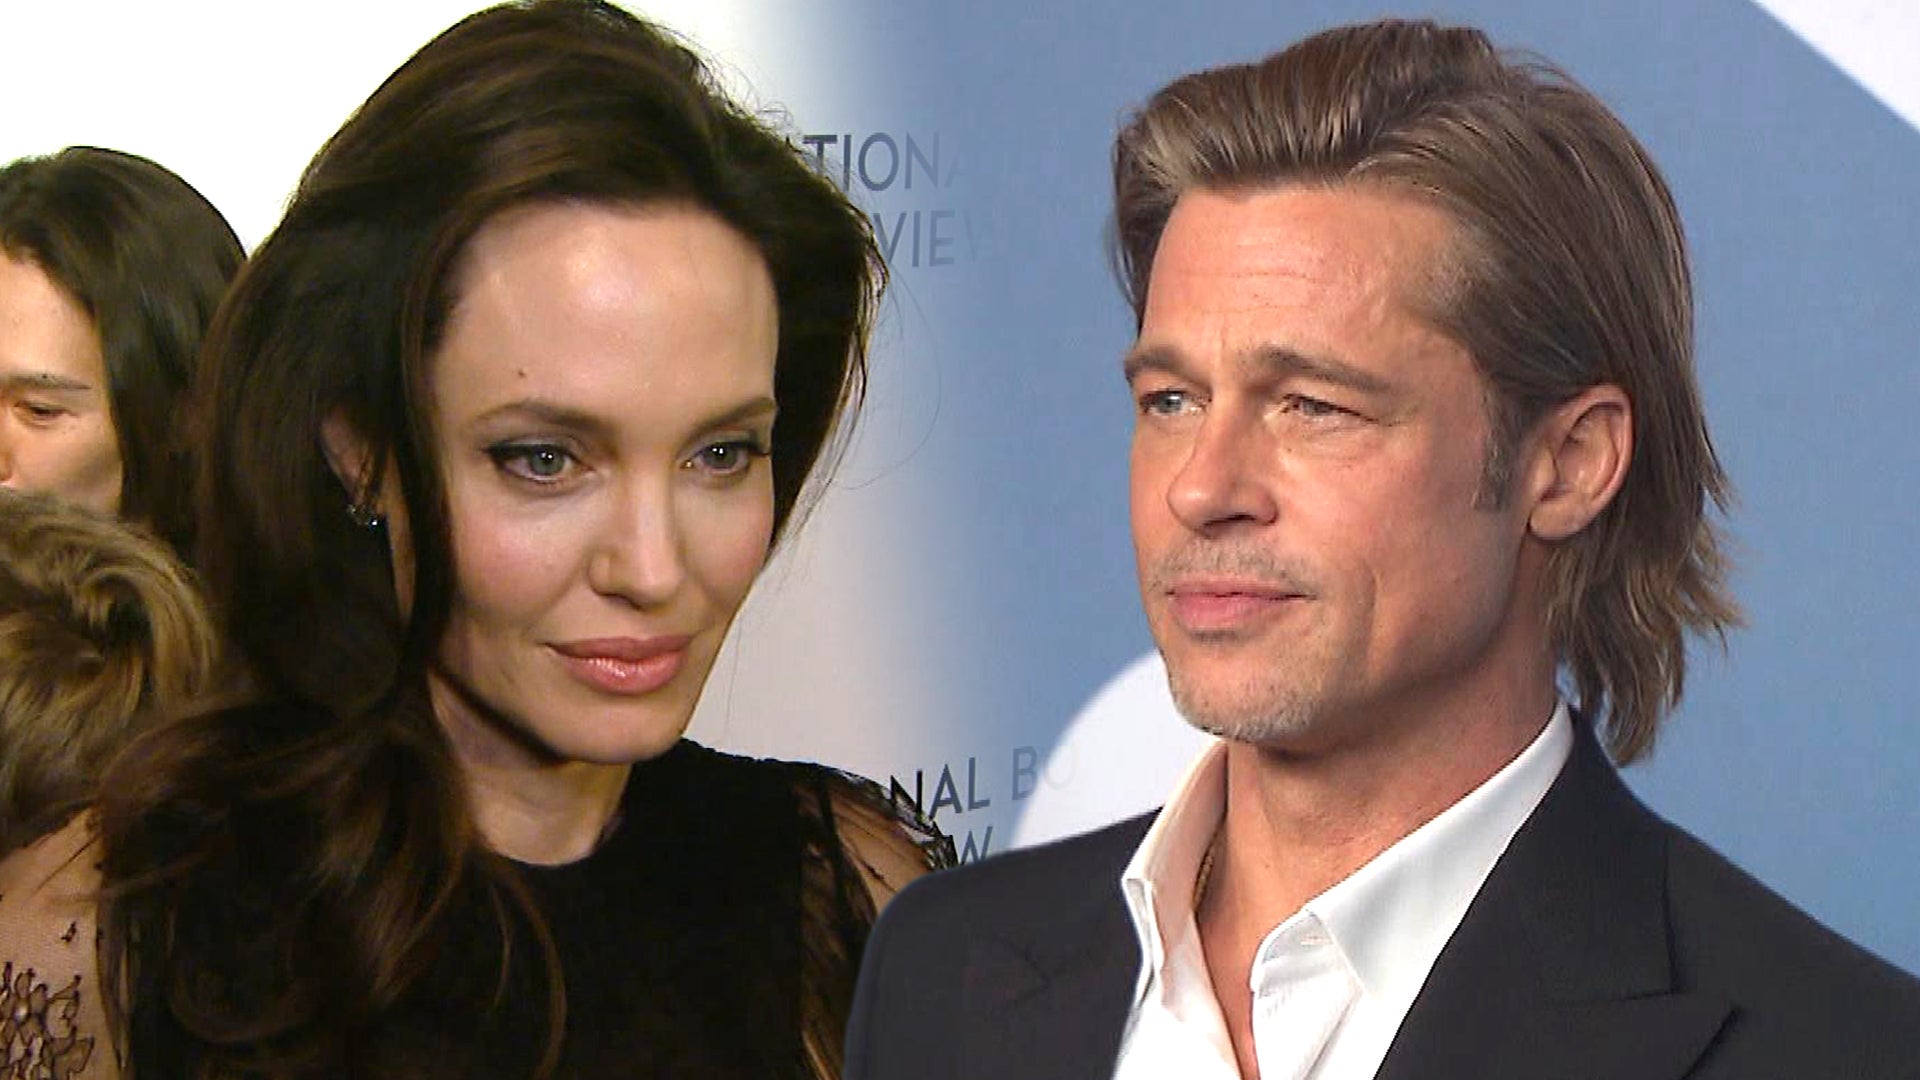 Angelina Jolie and Brad Pitt A Timeline of Their Divorce and High-Profile Legal Battles Entertainment Tonight photo